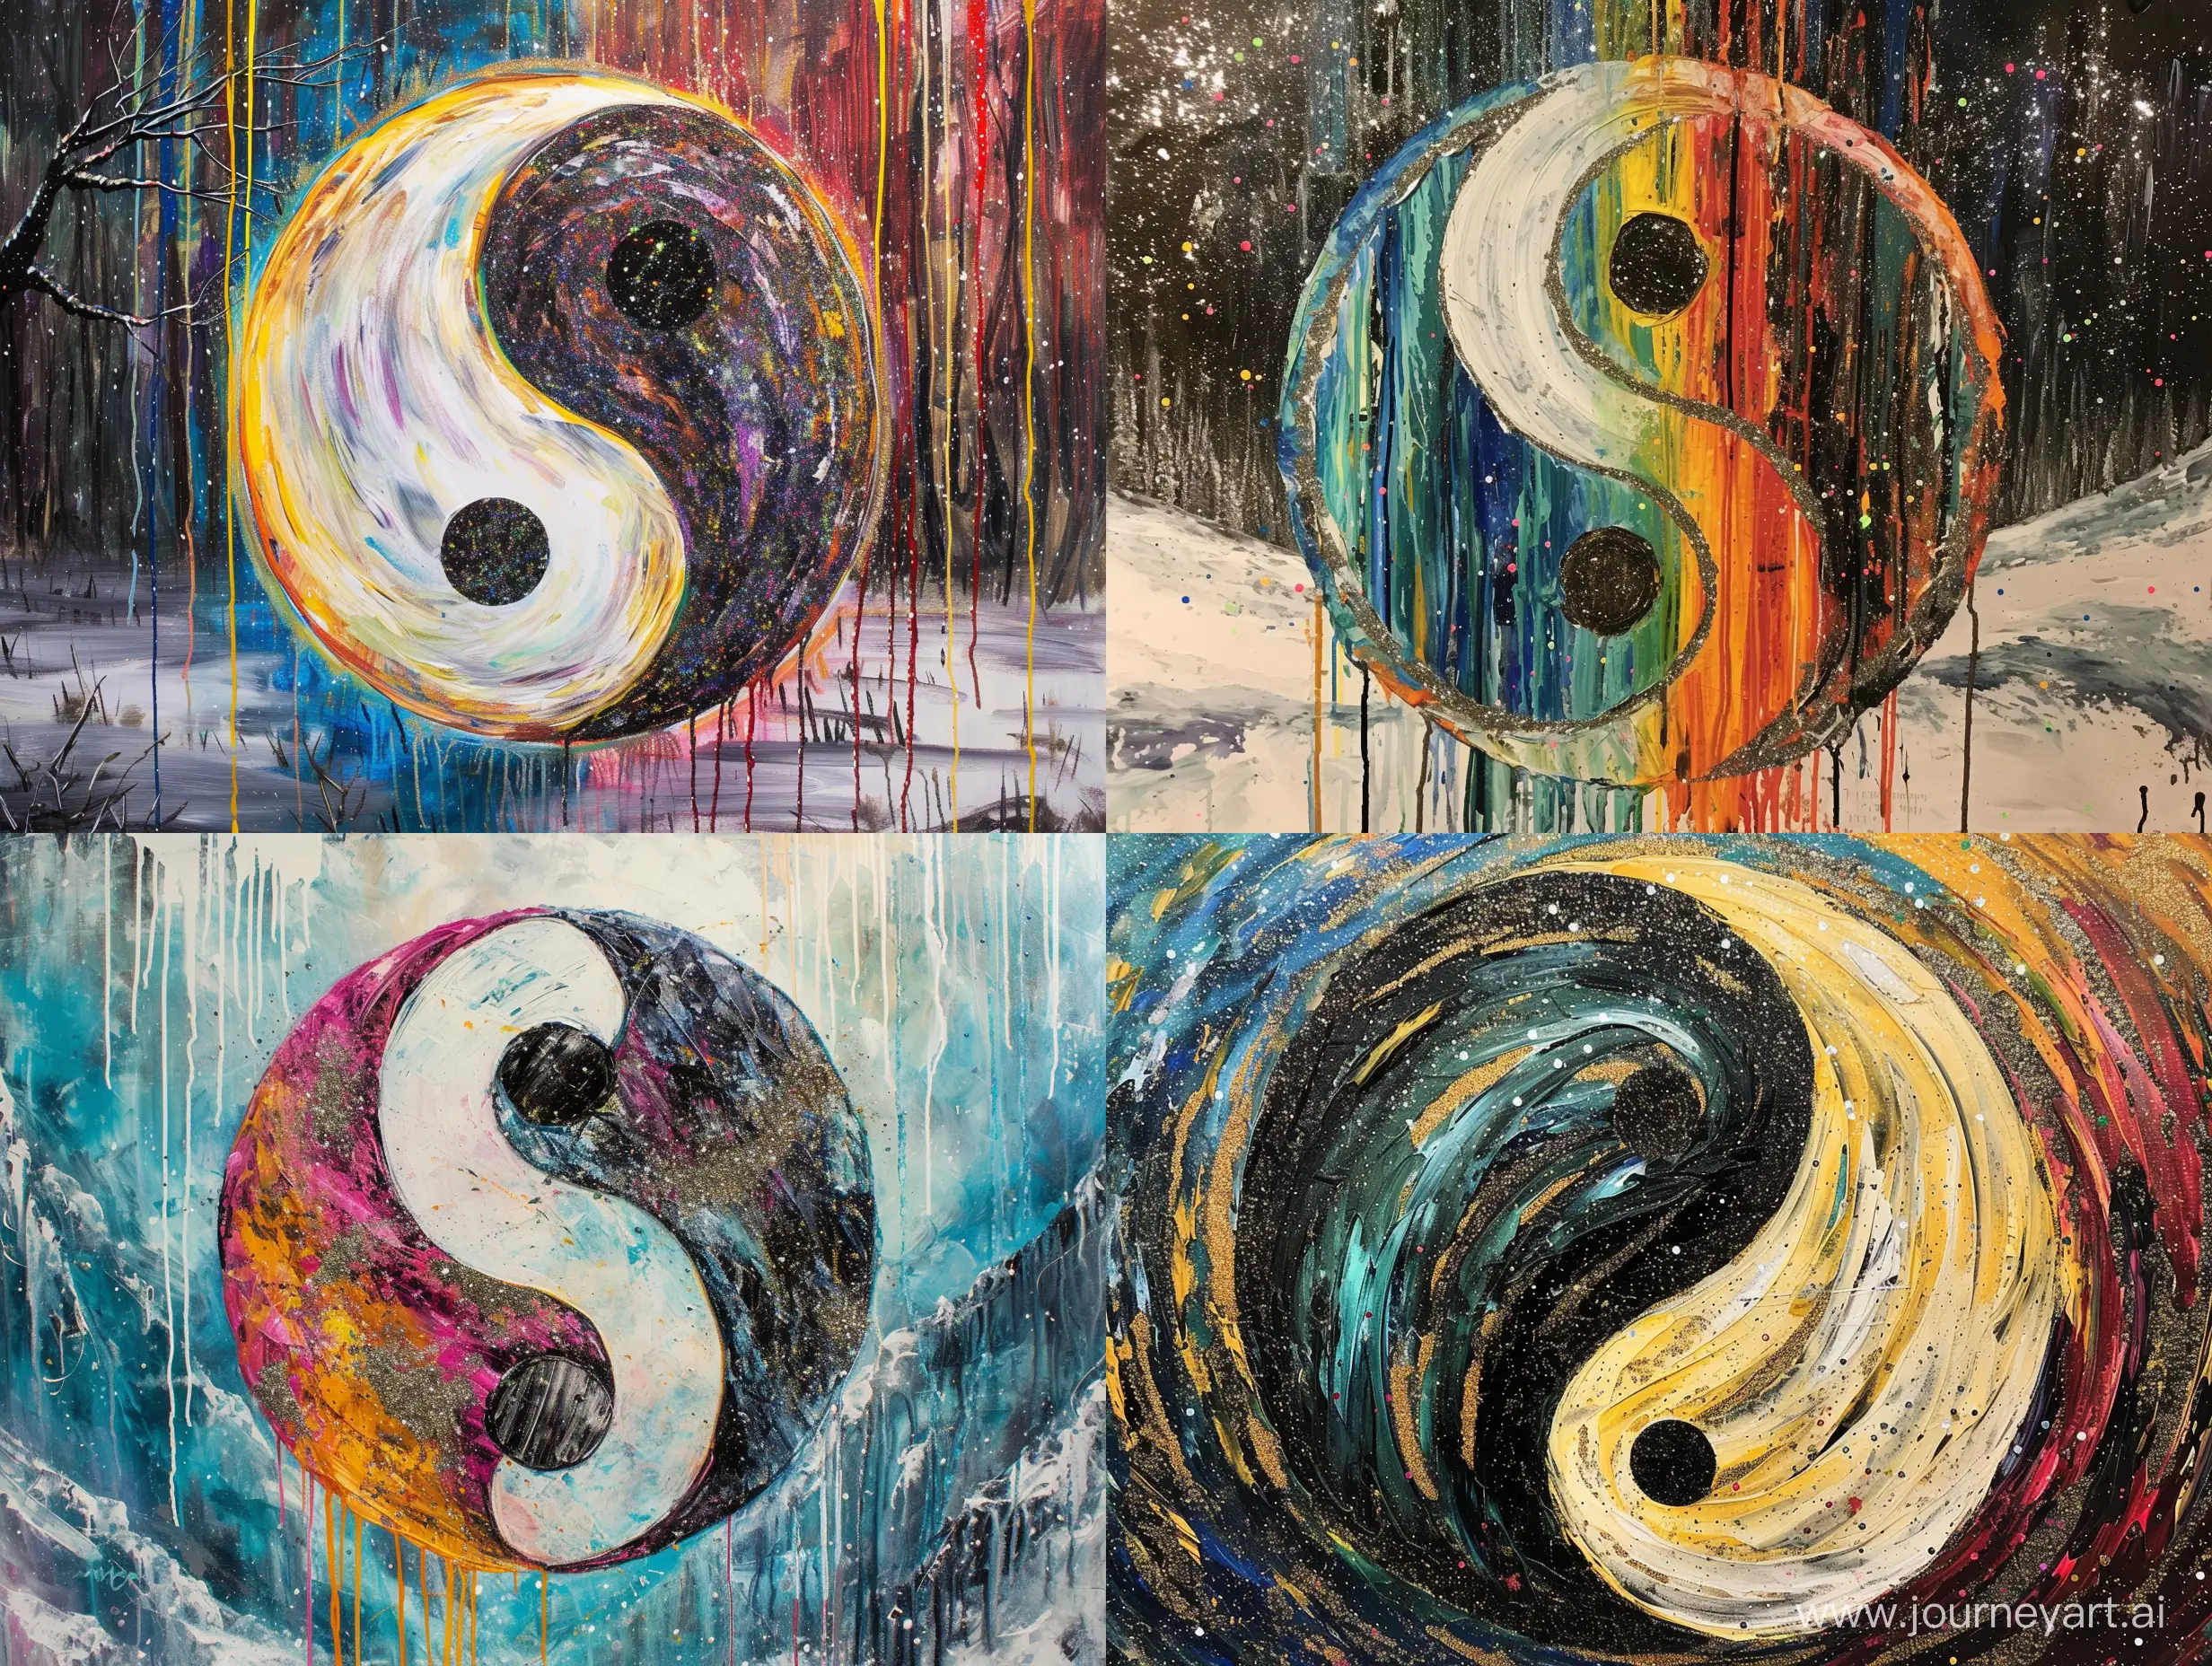 Vibrant-Winter-Landscape-with-Yin-Yang-Harmony-and-Expressive-Paint-Streaks